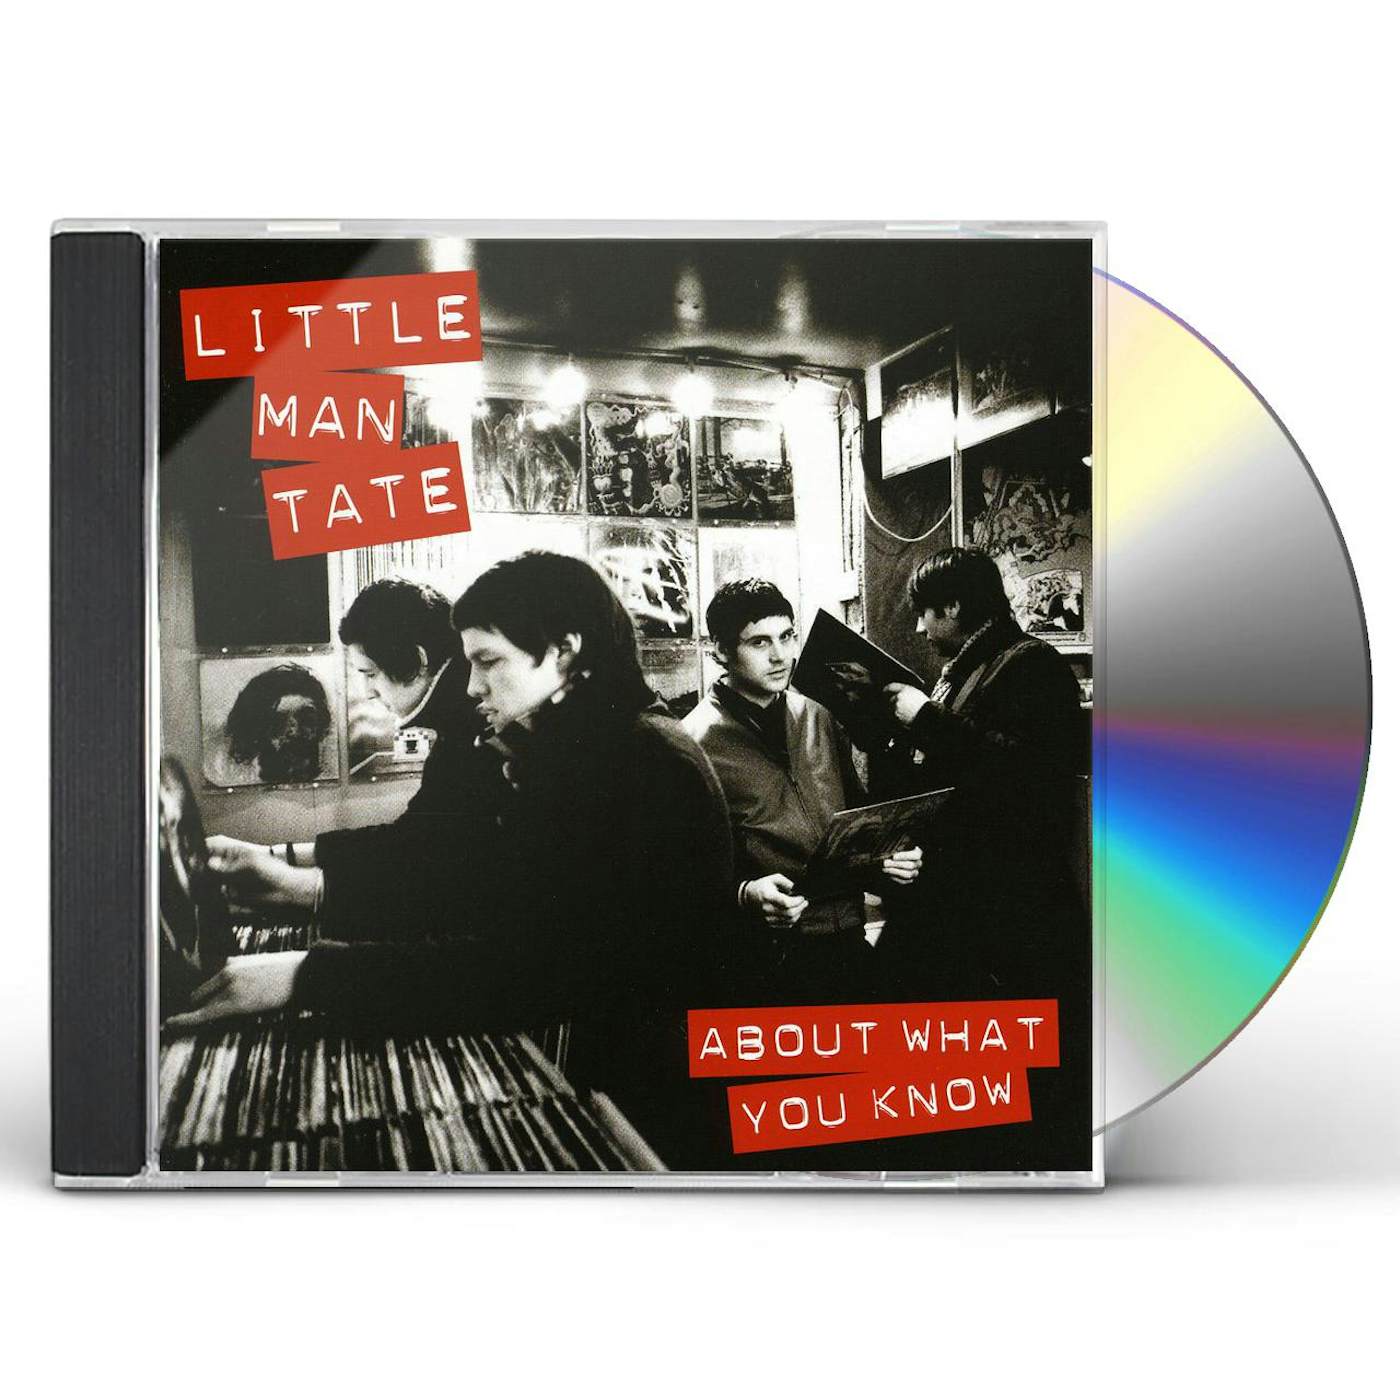 Little Man Tate ABOUT WHAT YOU KNOW CD